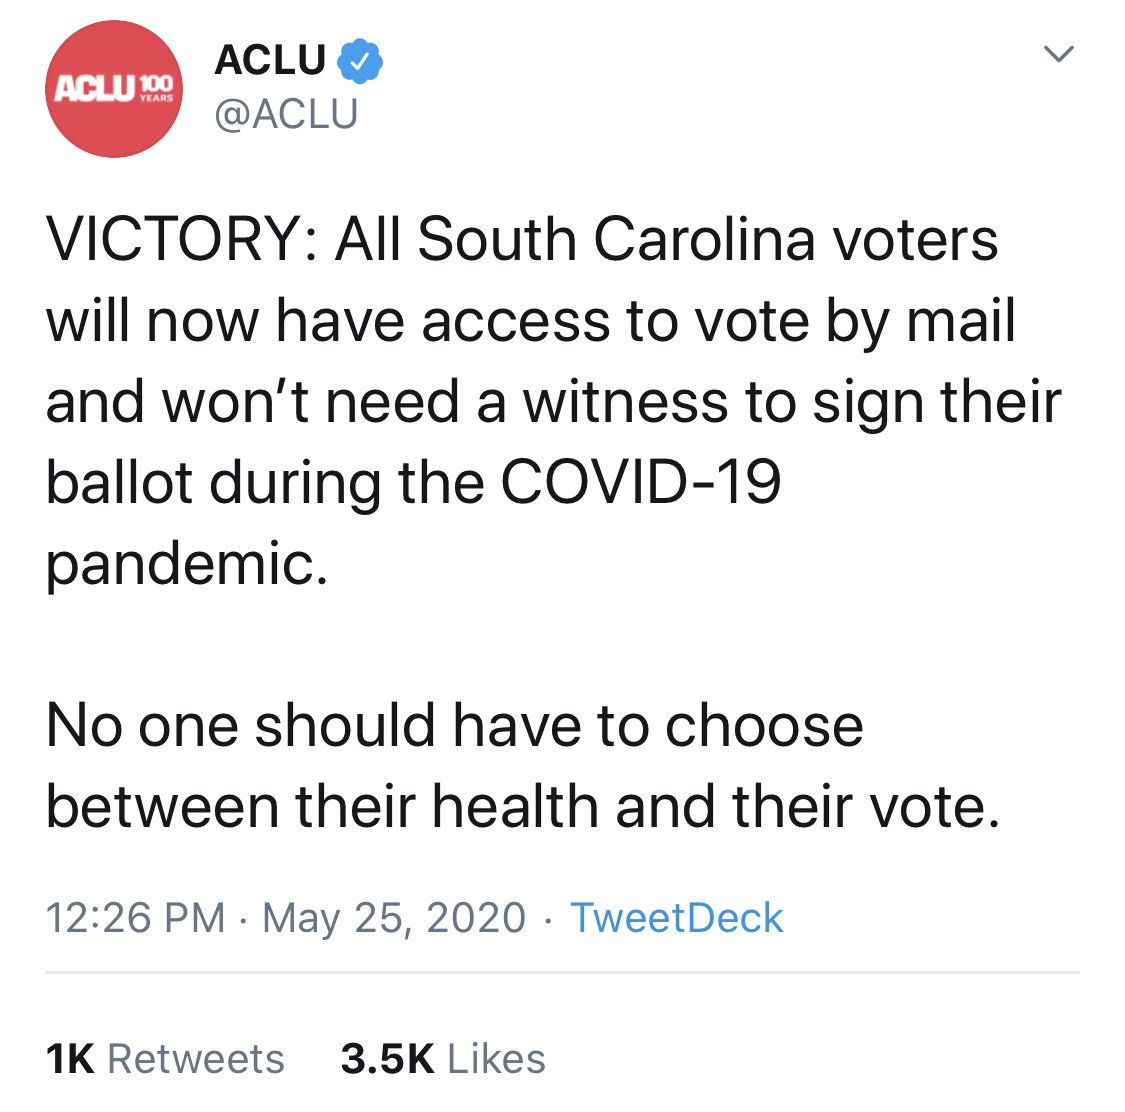 [21] ACLU Receives Stunning Victory Removing Vote By Mail Witnesses in South Carolina. https://twitter.com/ACLU/status/12649560000896368642020 Presidential ElectionQui Bono: DemocratsState: South Carolina